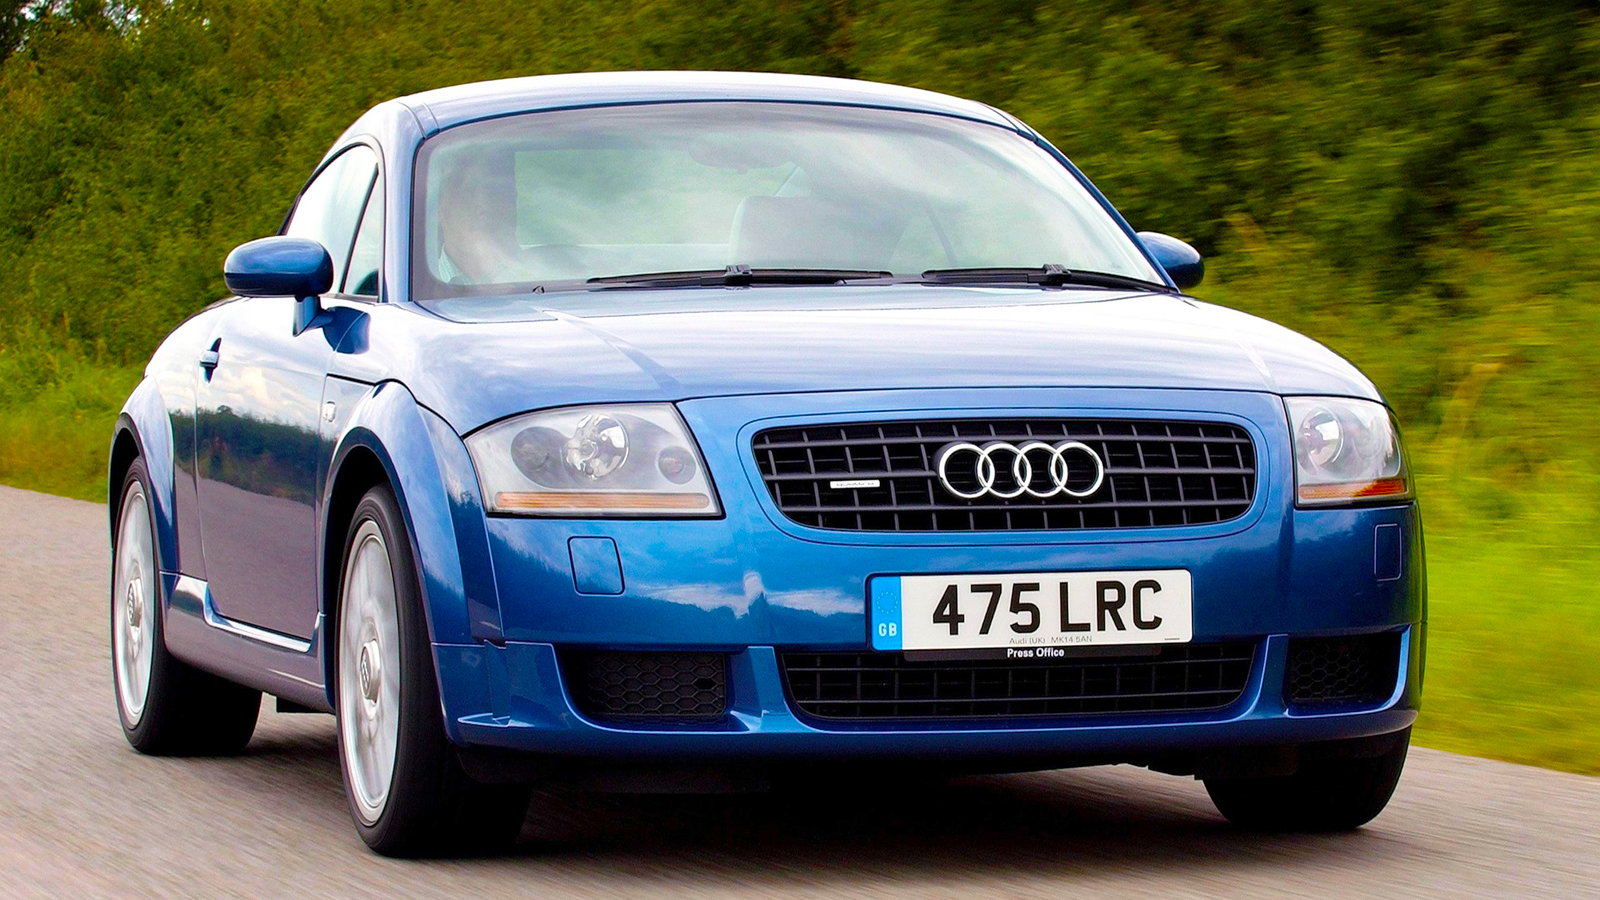 Daily Slideshow: 6 Cars That Influenced the Creation of the Audi